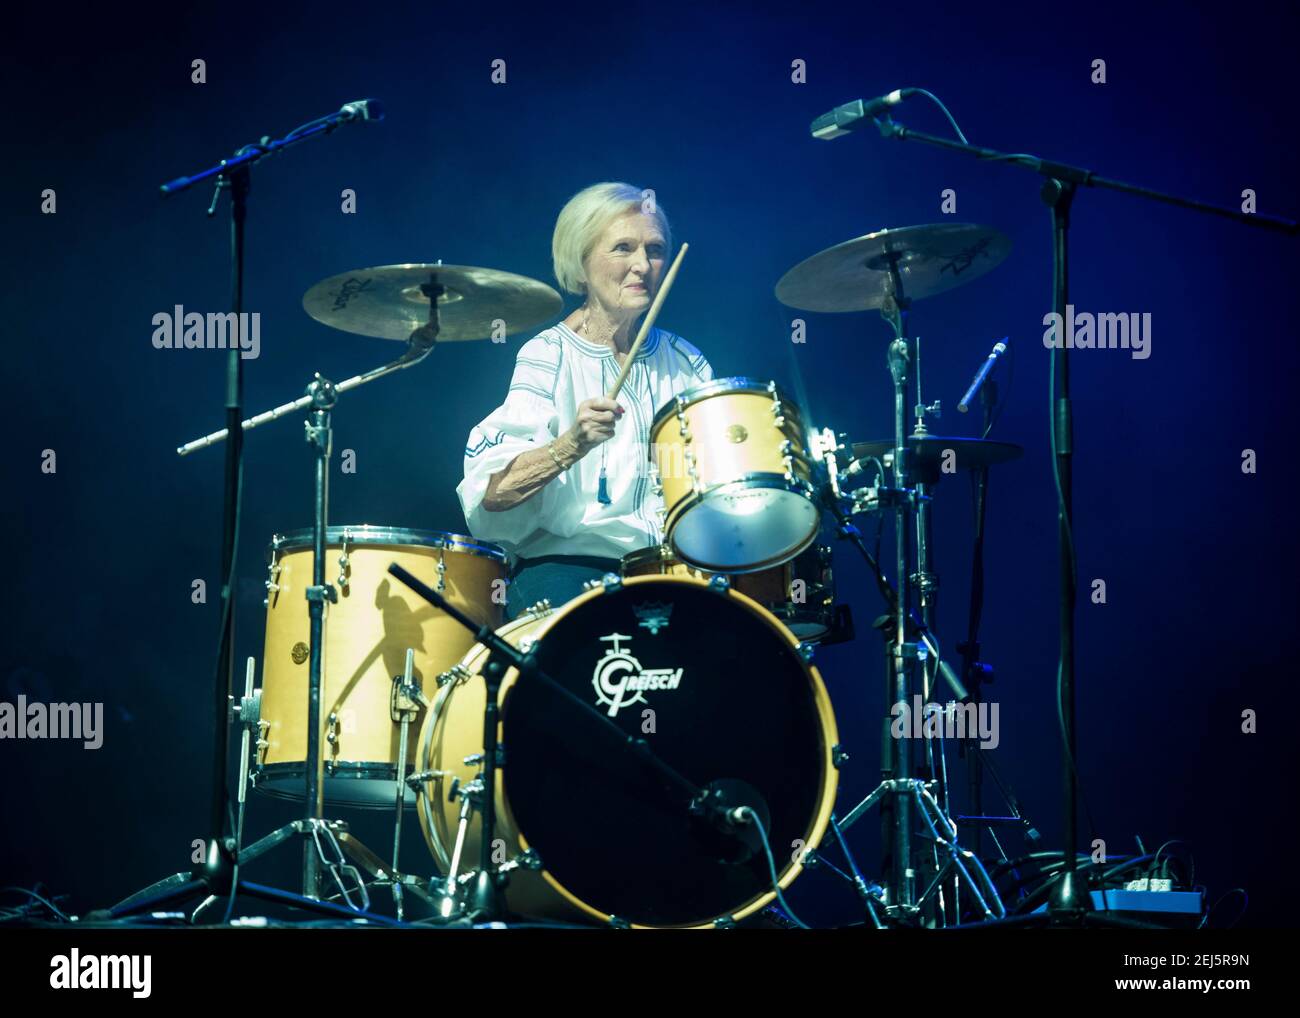 Mary Berry plays the drums on stage with Rick Astley at Camp Bestival 2018, Lulworth Castle, Wareham. Picture date: Friday 27th July 2018. Photo credit should read: David Jensent Stock Photo